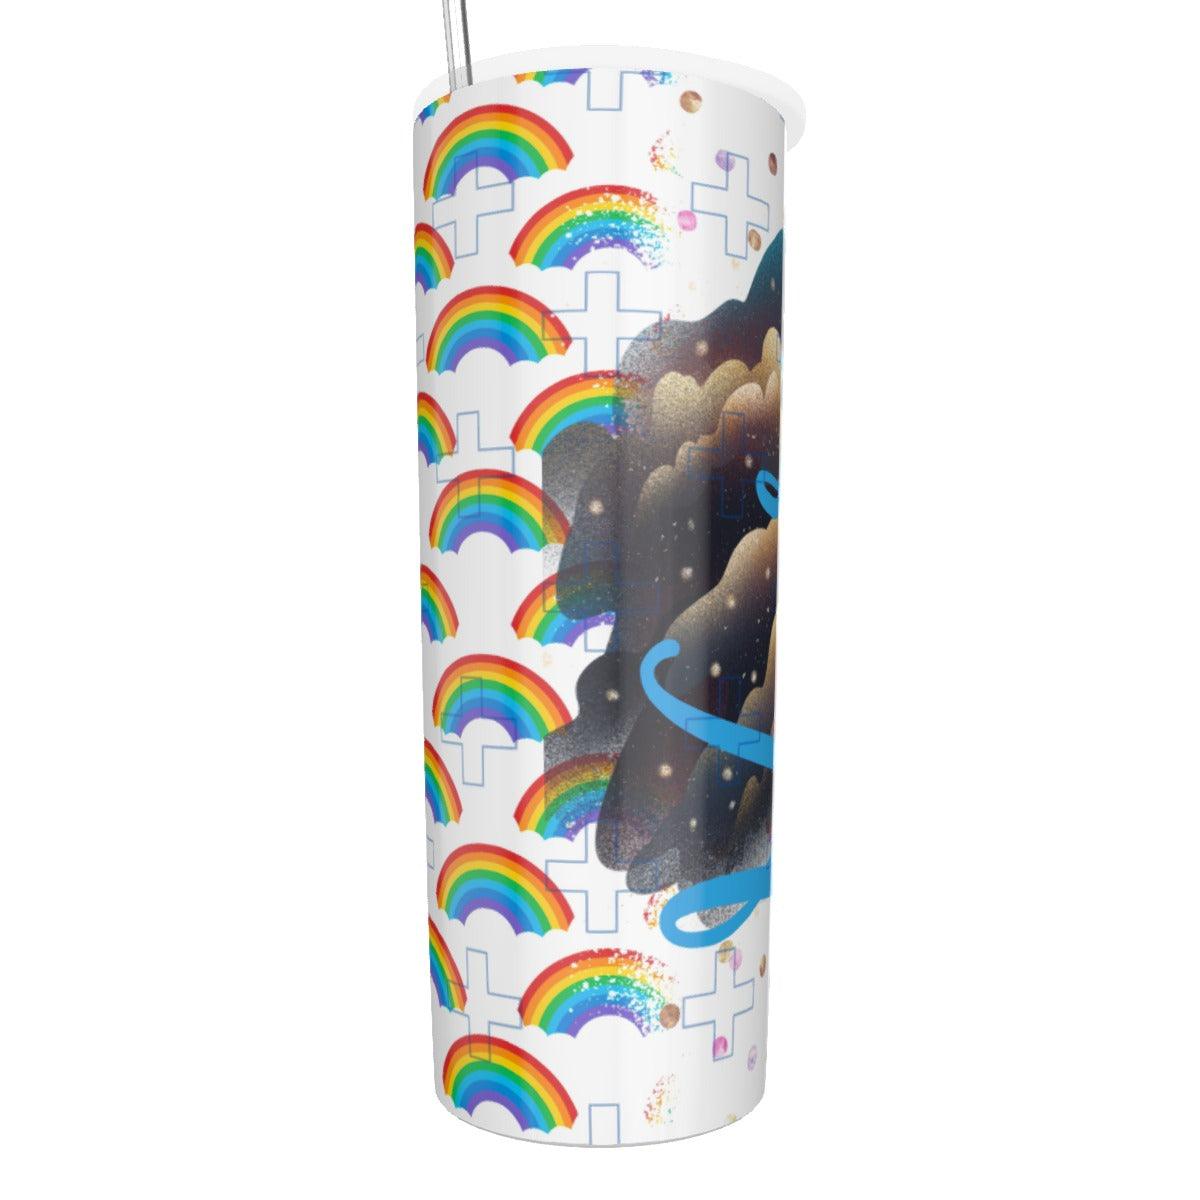 Nurse Rainbow and Clouds tumbler personalized gift for doctor nurse appreciation gift for RN personalized tumbler gift grad medic insulated coffee travel cup